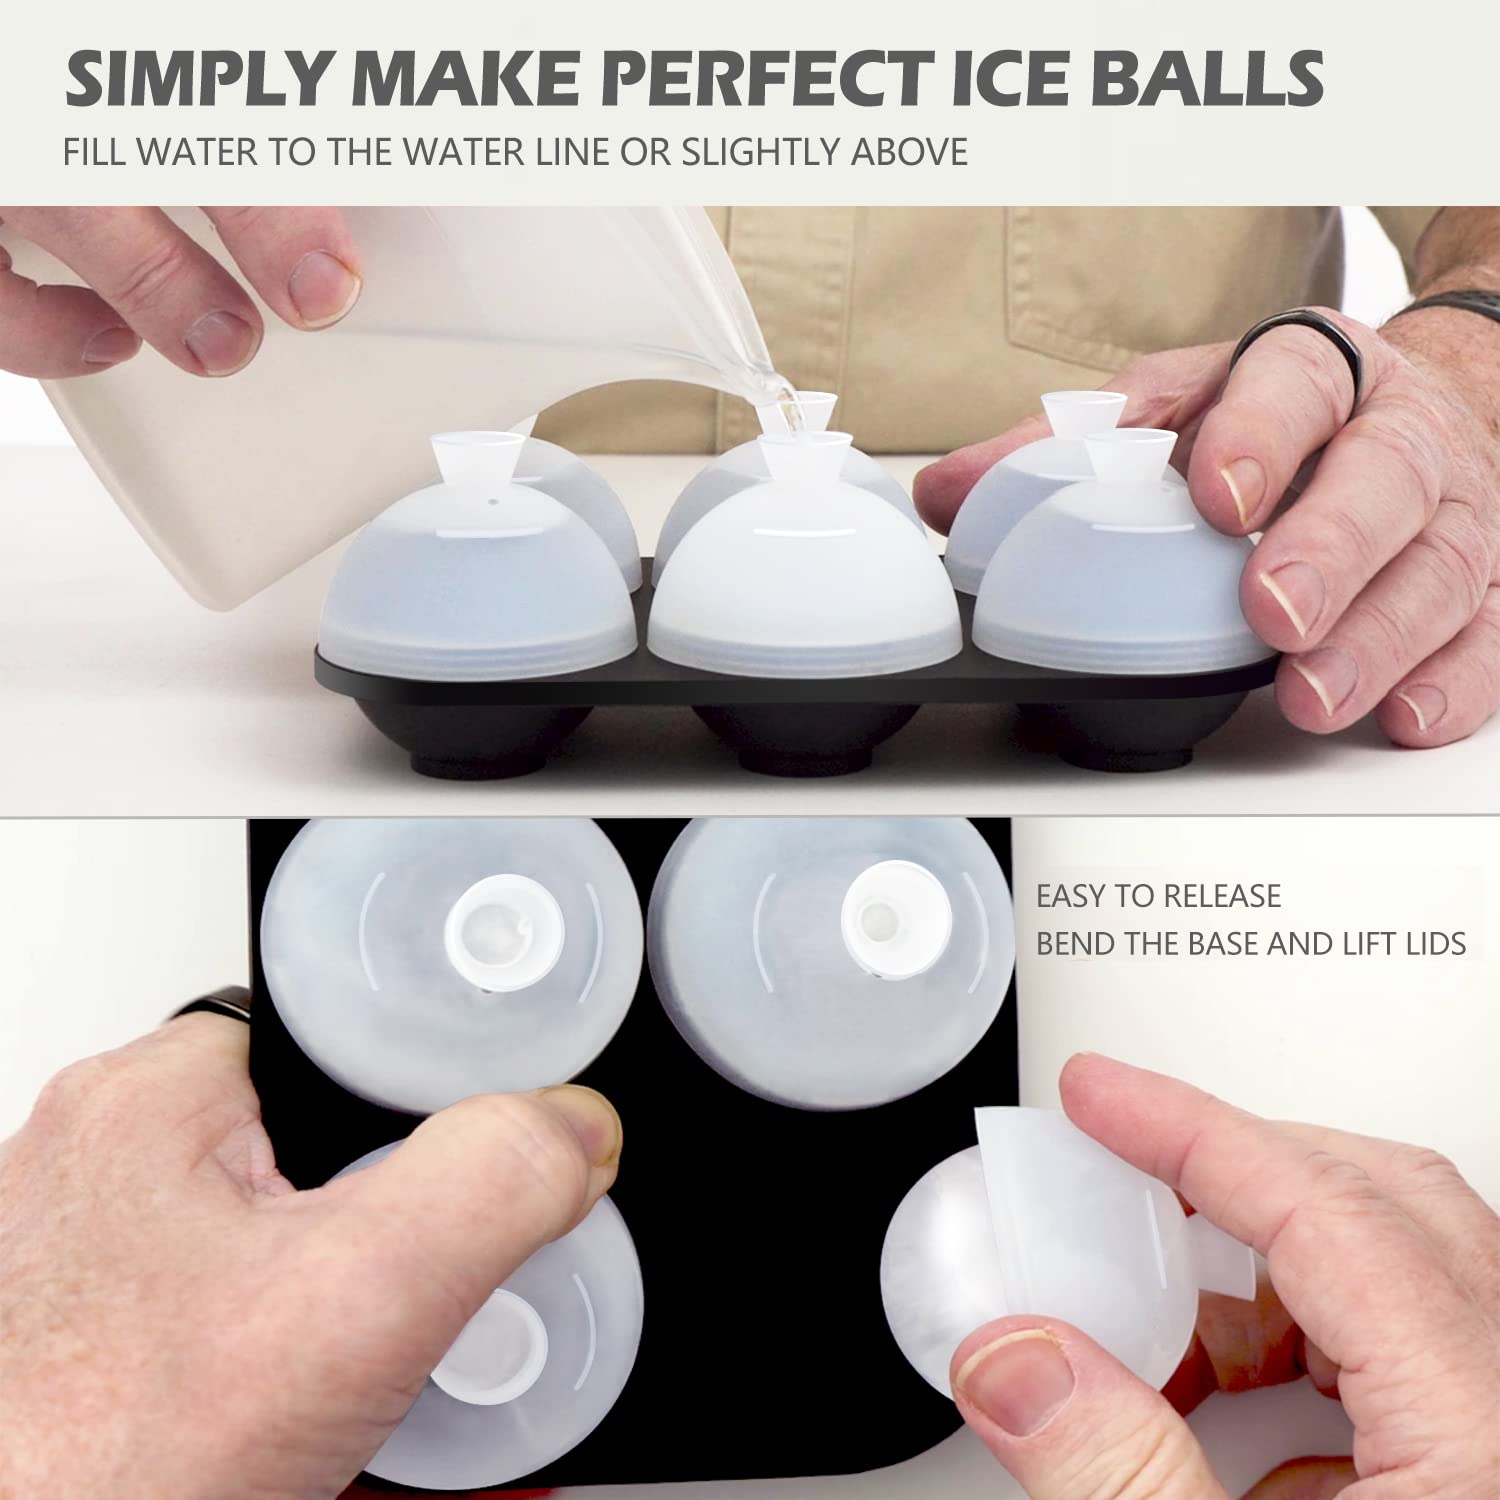 HONYAO Whiskey Ice Ball Mold, Silicone Ice Ball Maker Mold with Individual Lid Easy Fill and Release Round Sphere Ice Mold for Cocktails Bourbon - 2 inch 6 Ice Balls